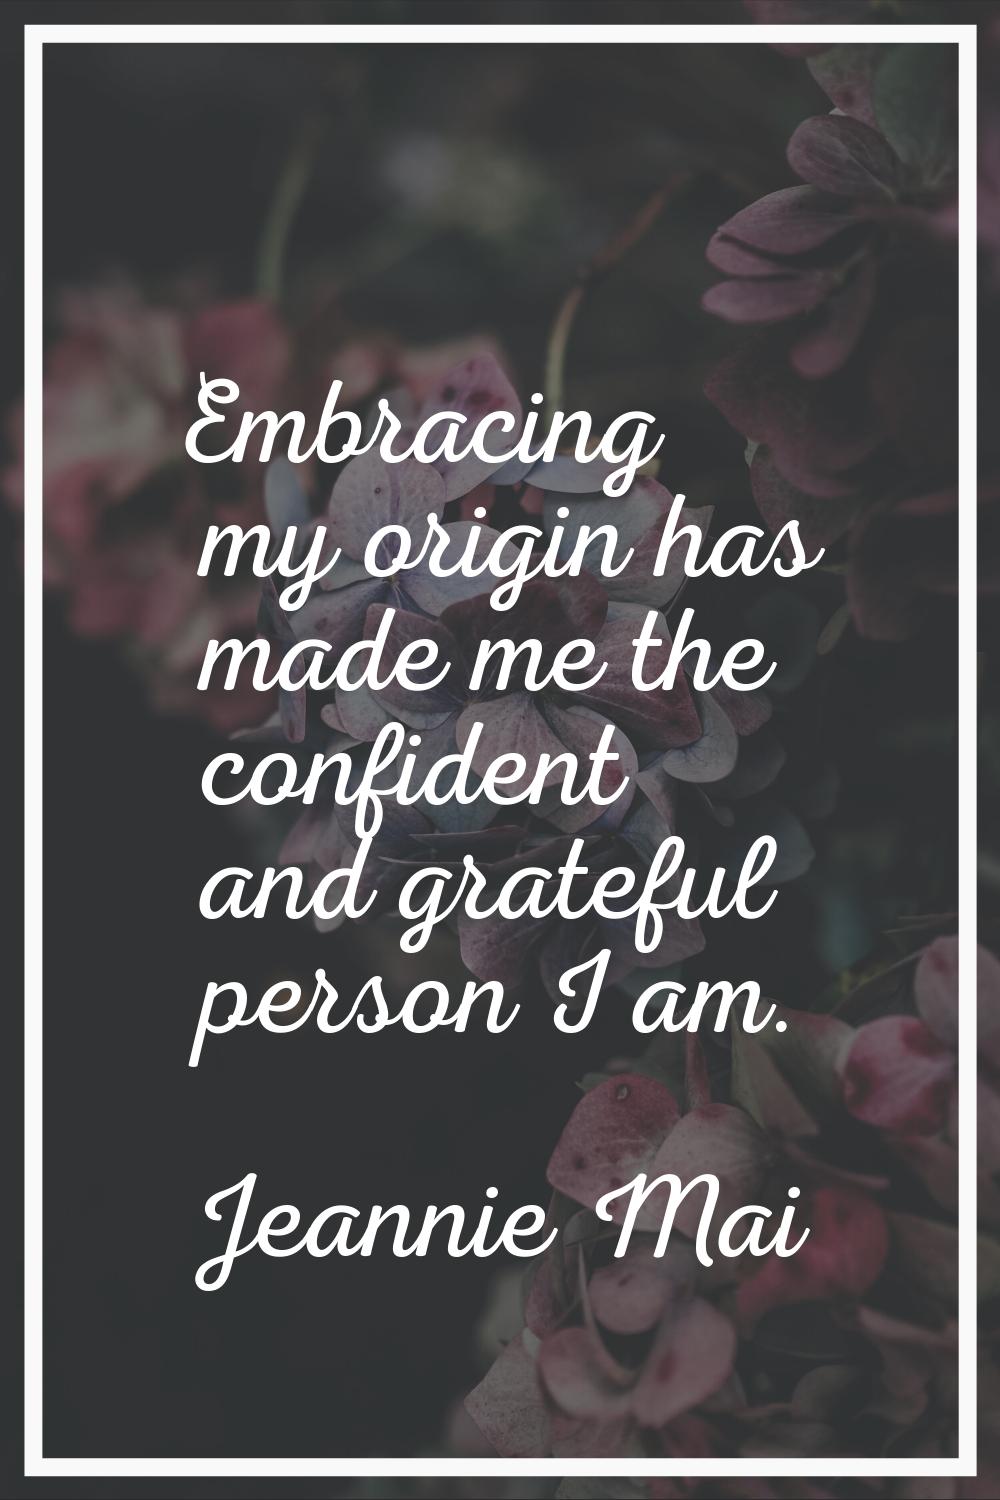 Embracing my origin has made me the confident and grateful person I am.